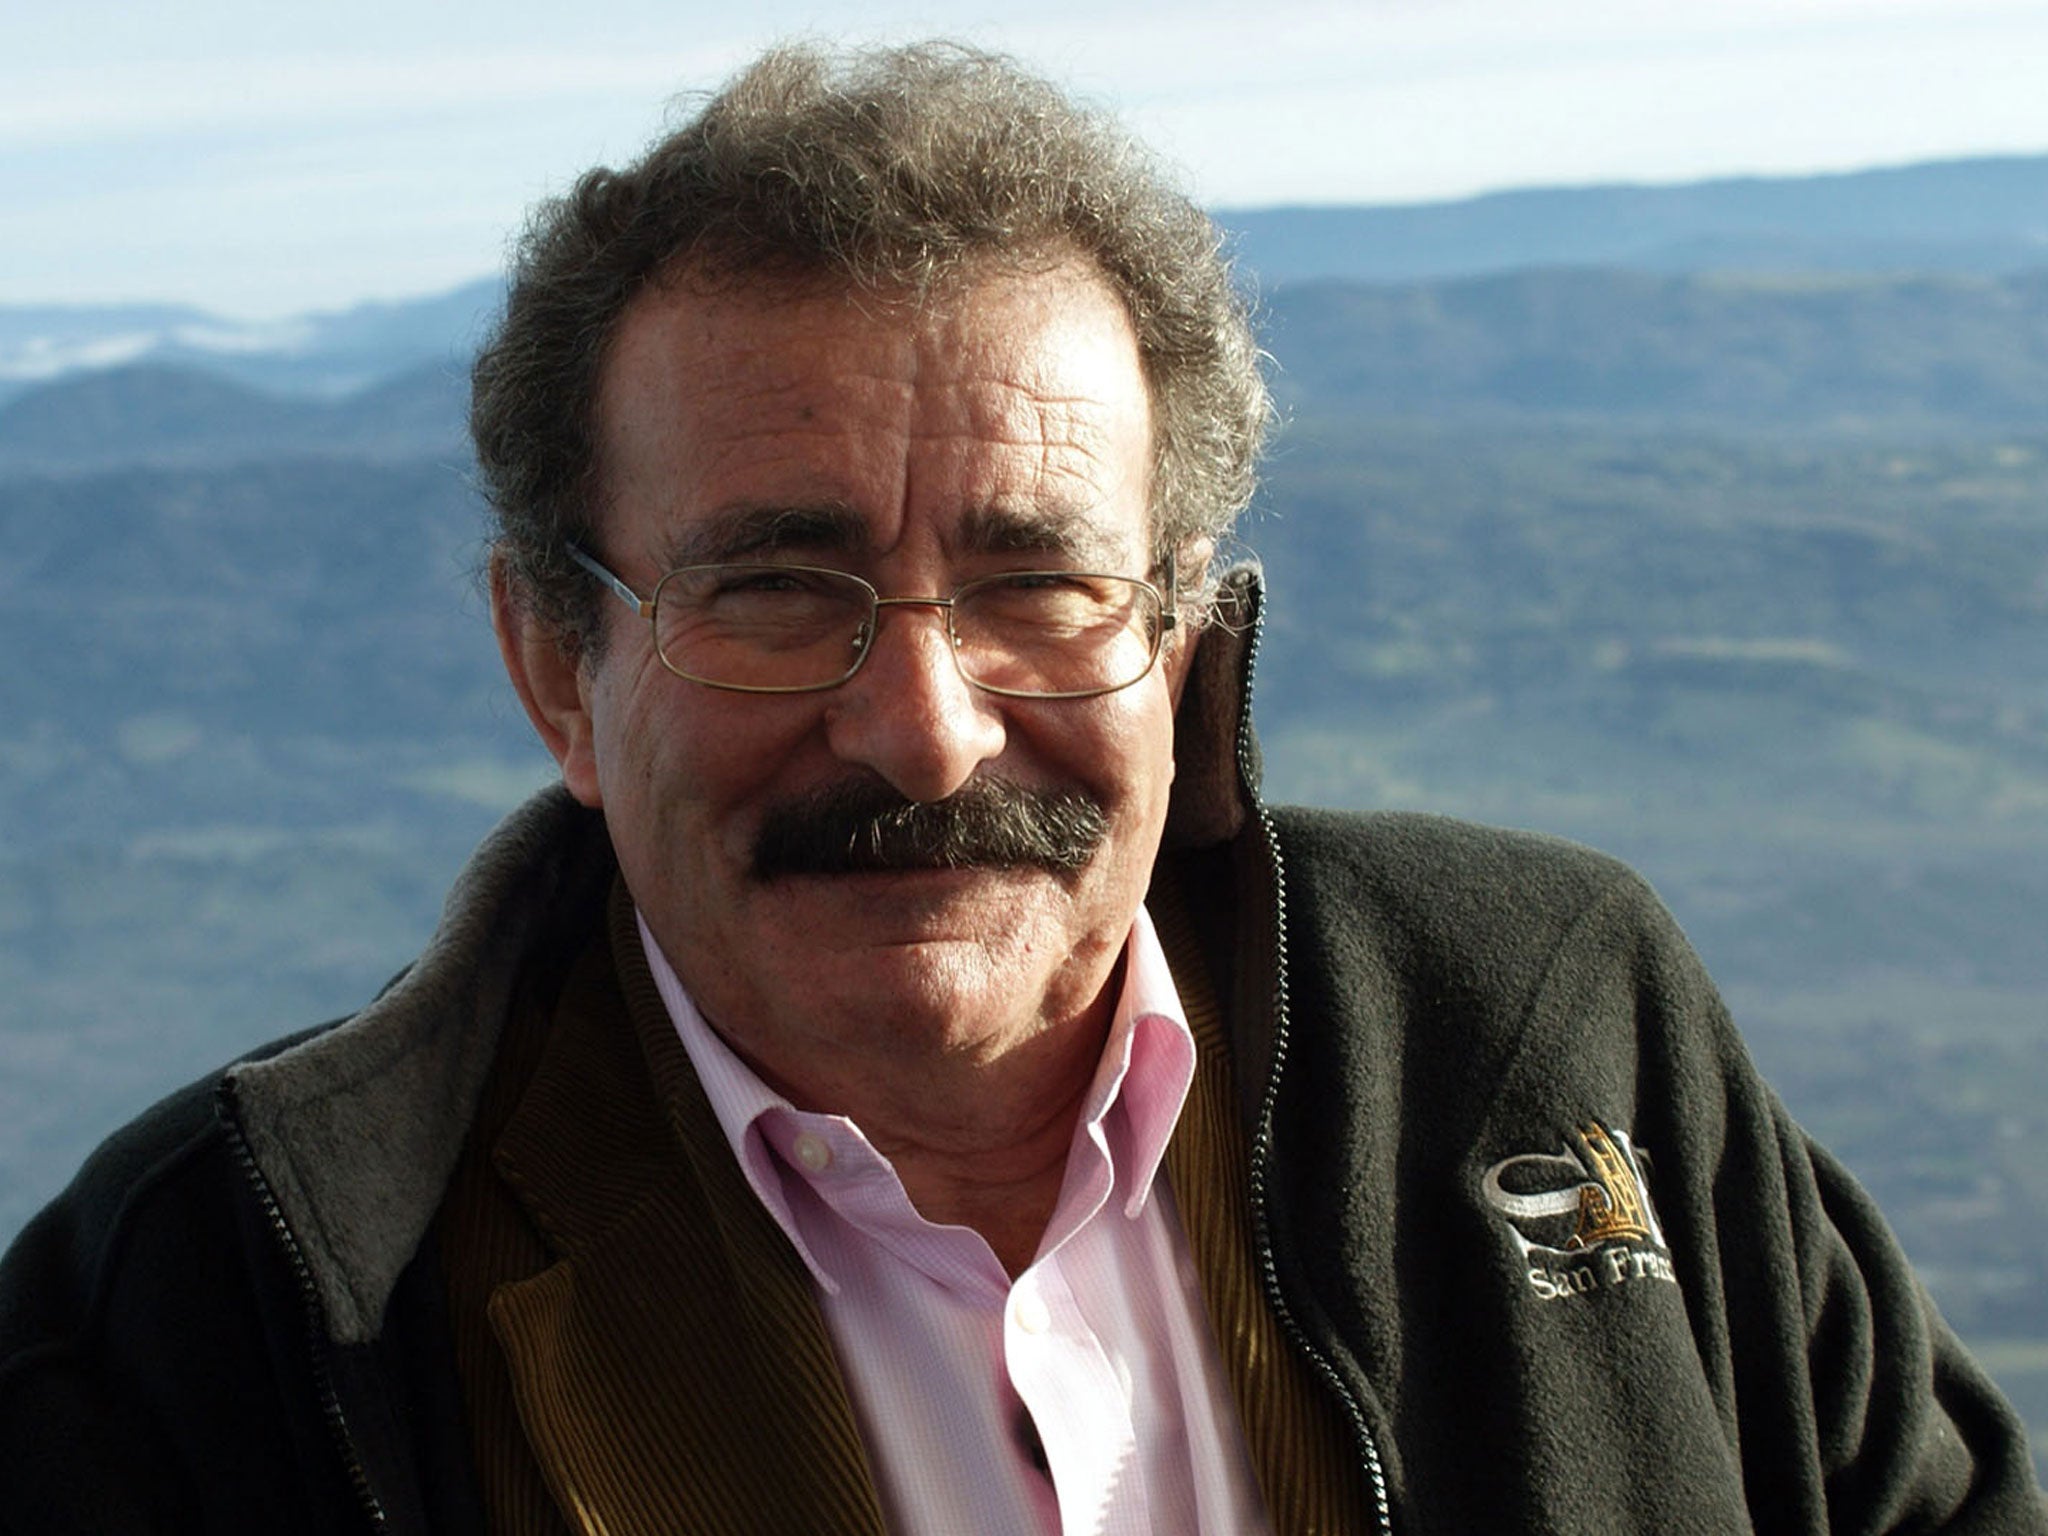 Robert Winston: 'Music of language means more than the words'